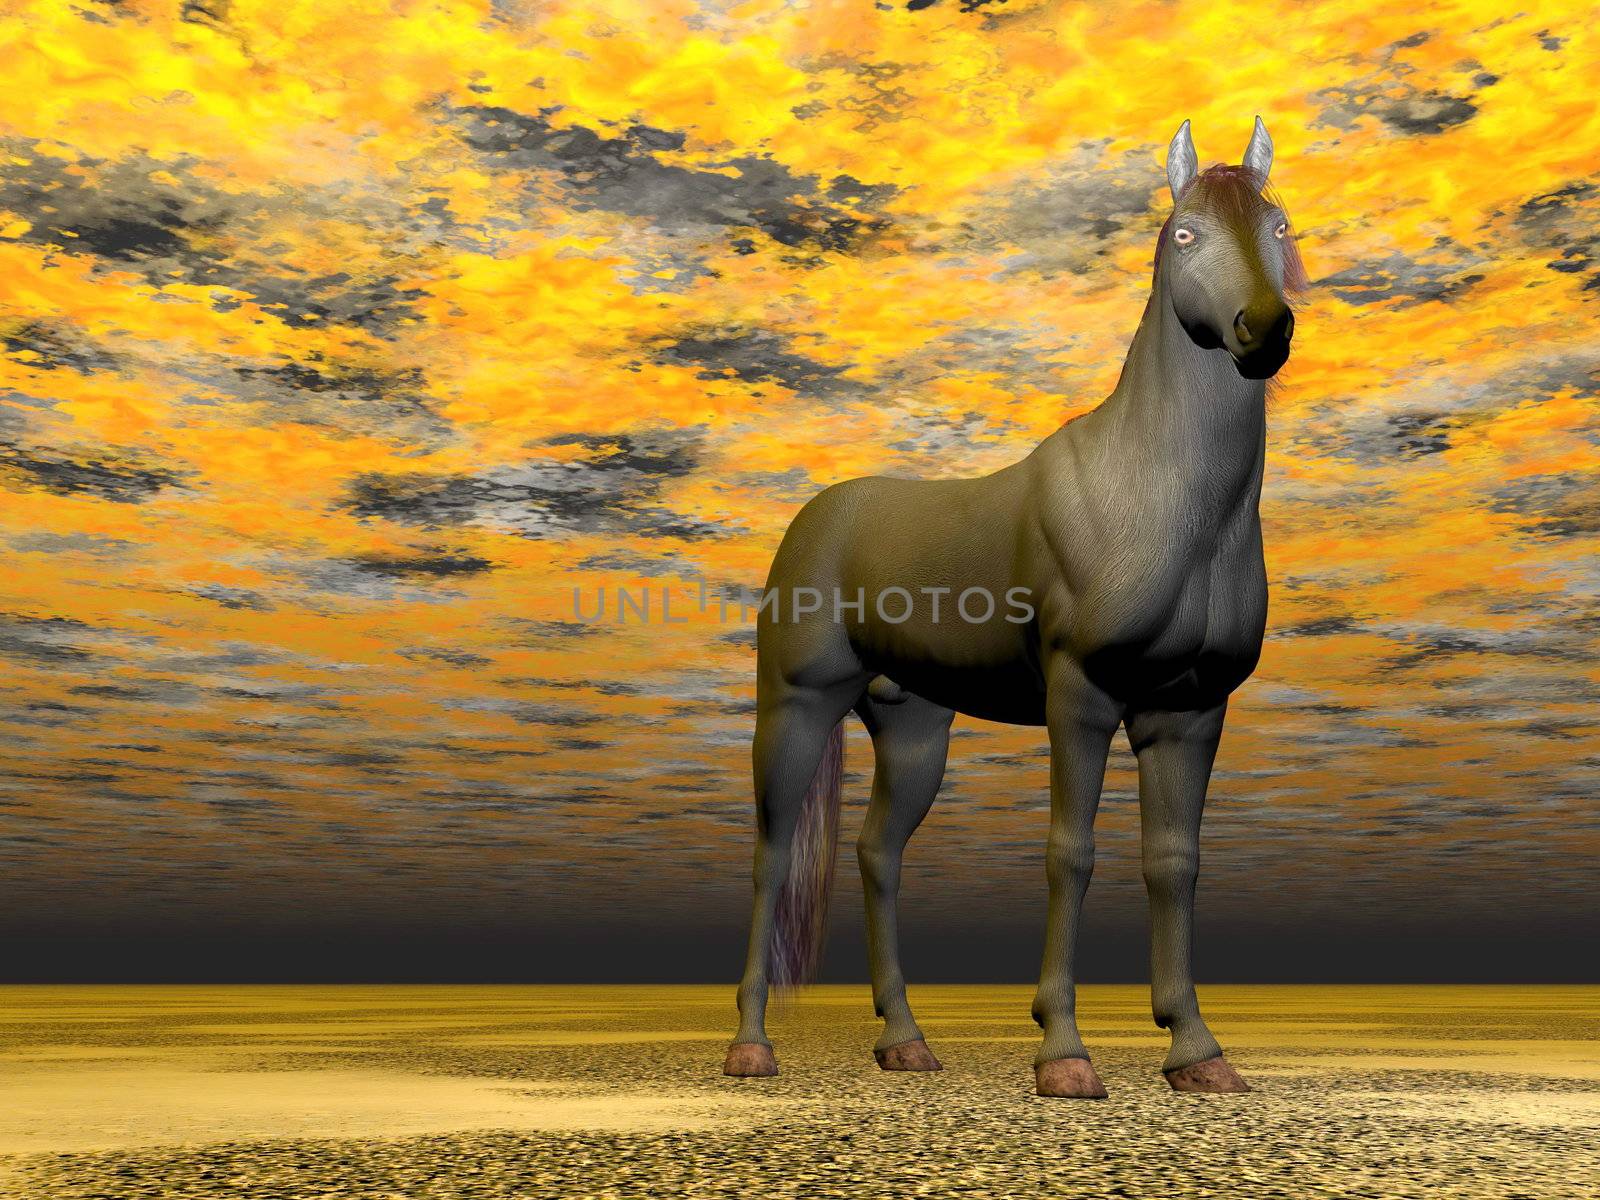 Surrealistic horse with beautiful eyes standing in colorful background